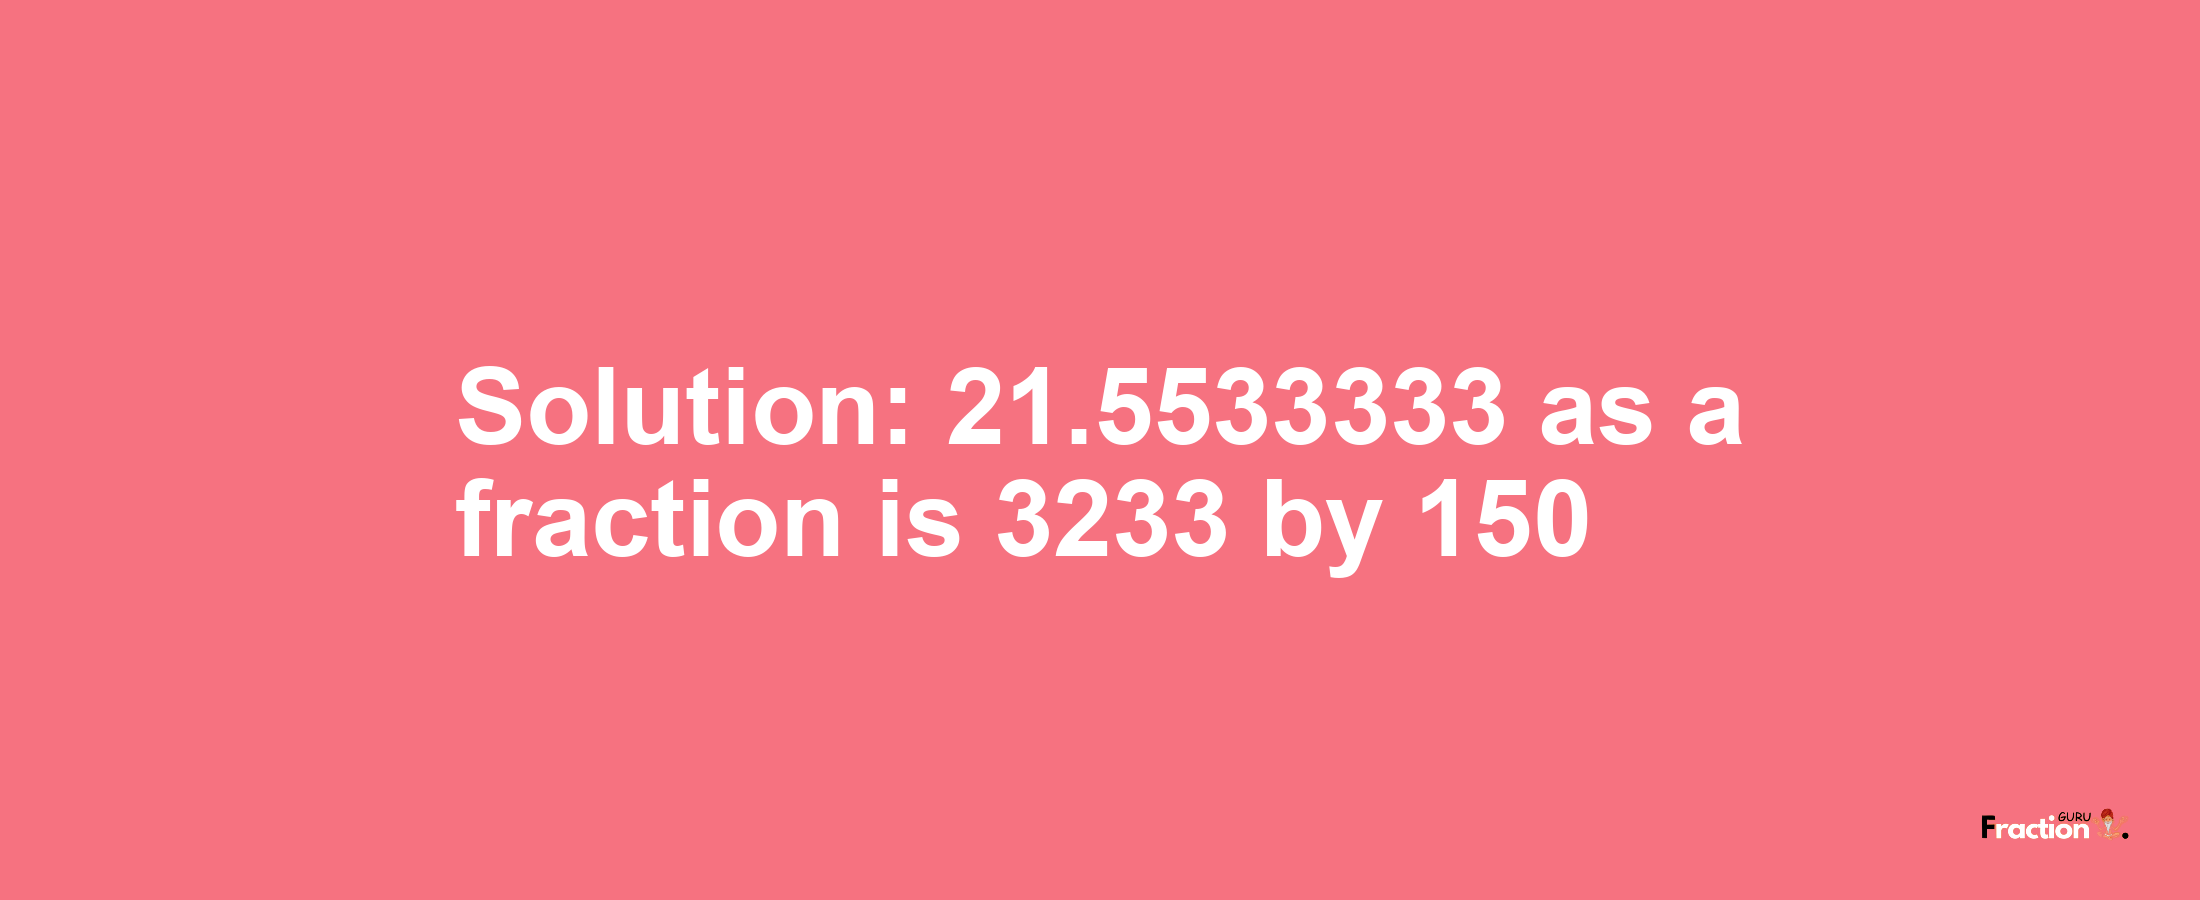 Solution:21.5533333 as a fraction is 3233/150